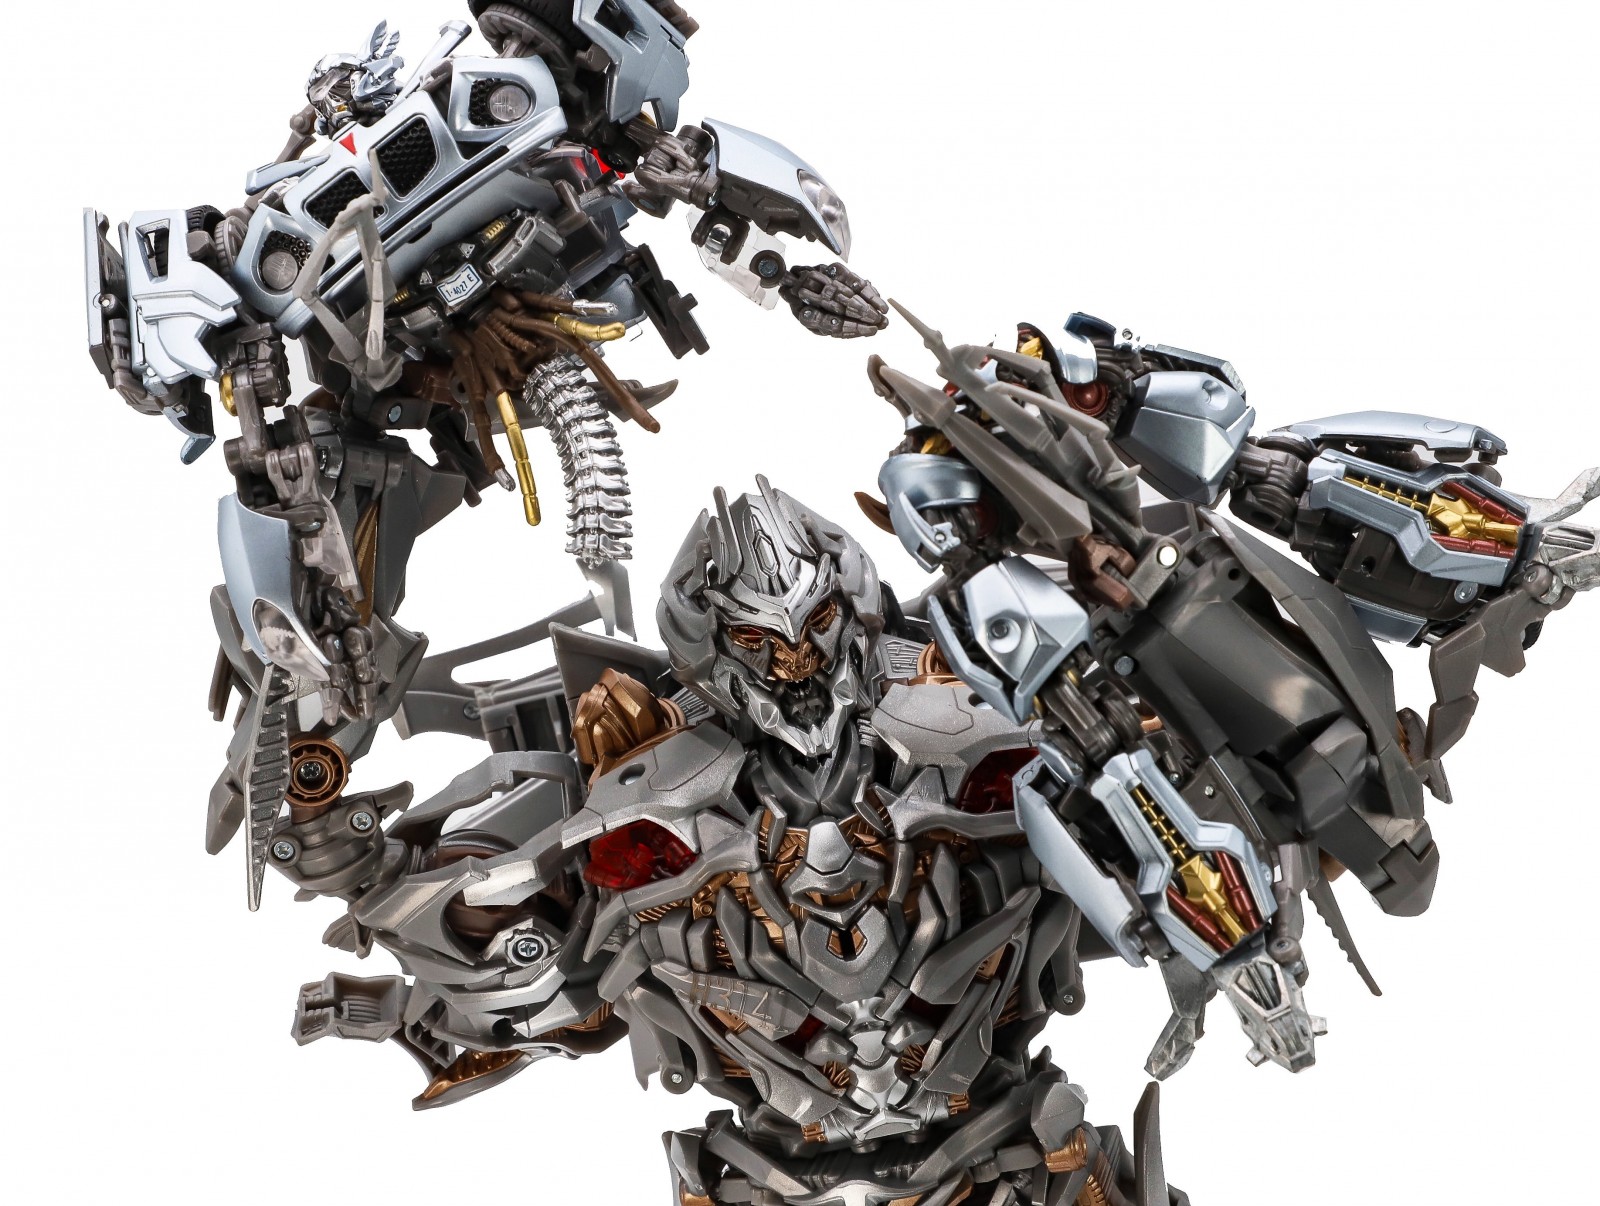 Transformers News: MPM Megatron and Jazz stock photos, prices, and release dates announced